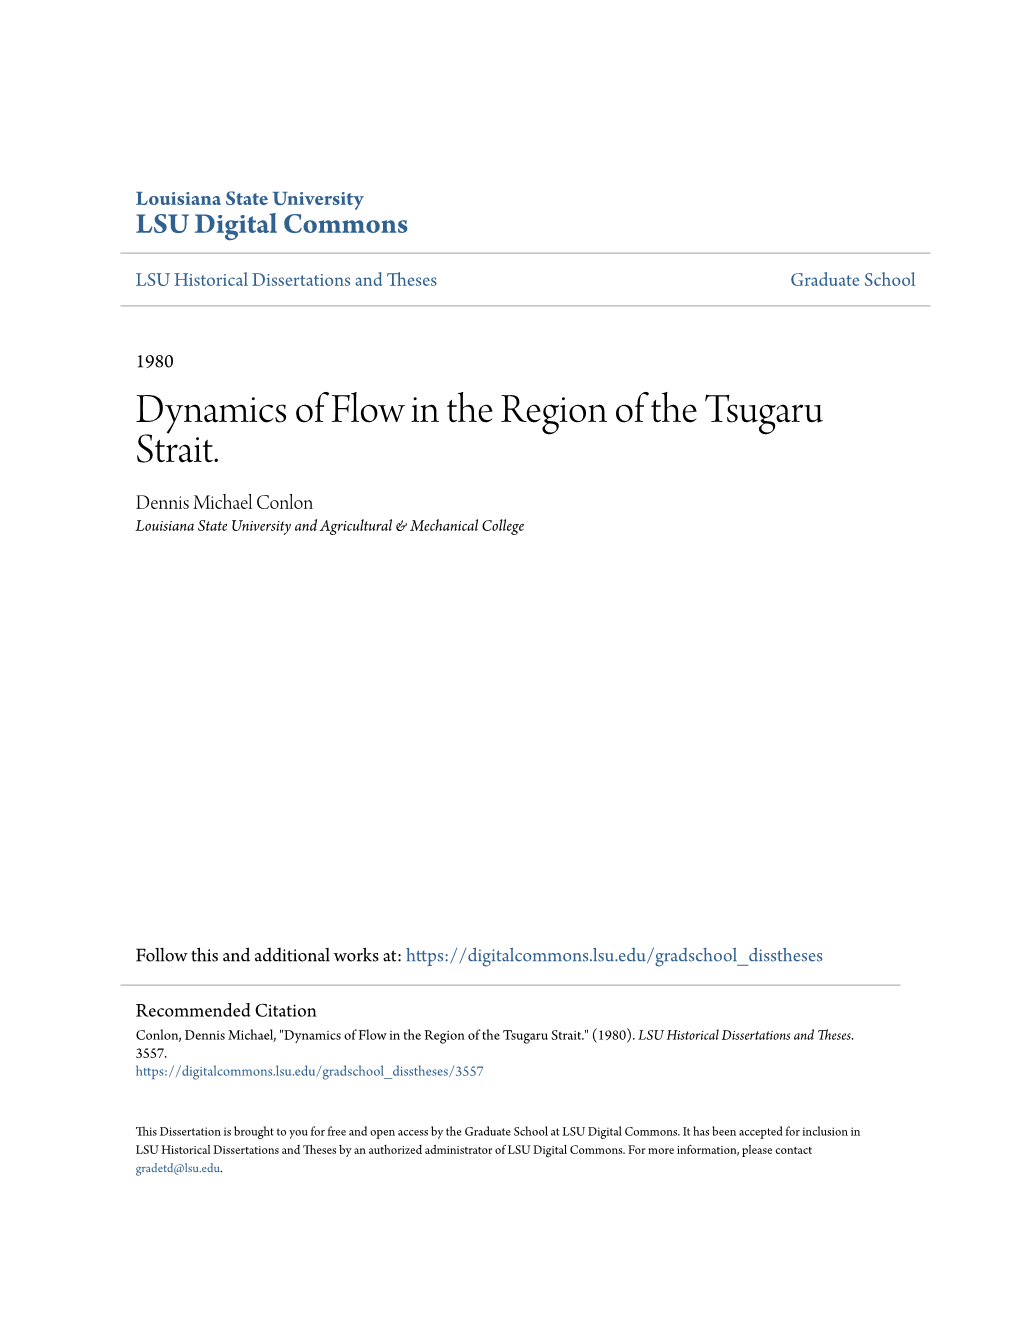 Dynamics of Flow in the Region of the Tsugaru Strait. Dennis Michael Conlon Louisiana State University and Agricultural & Mechanical College